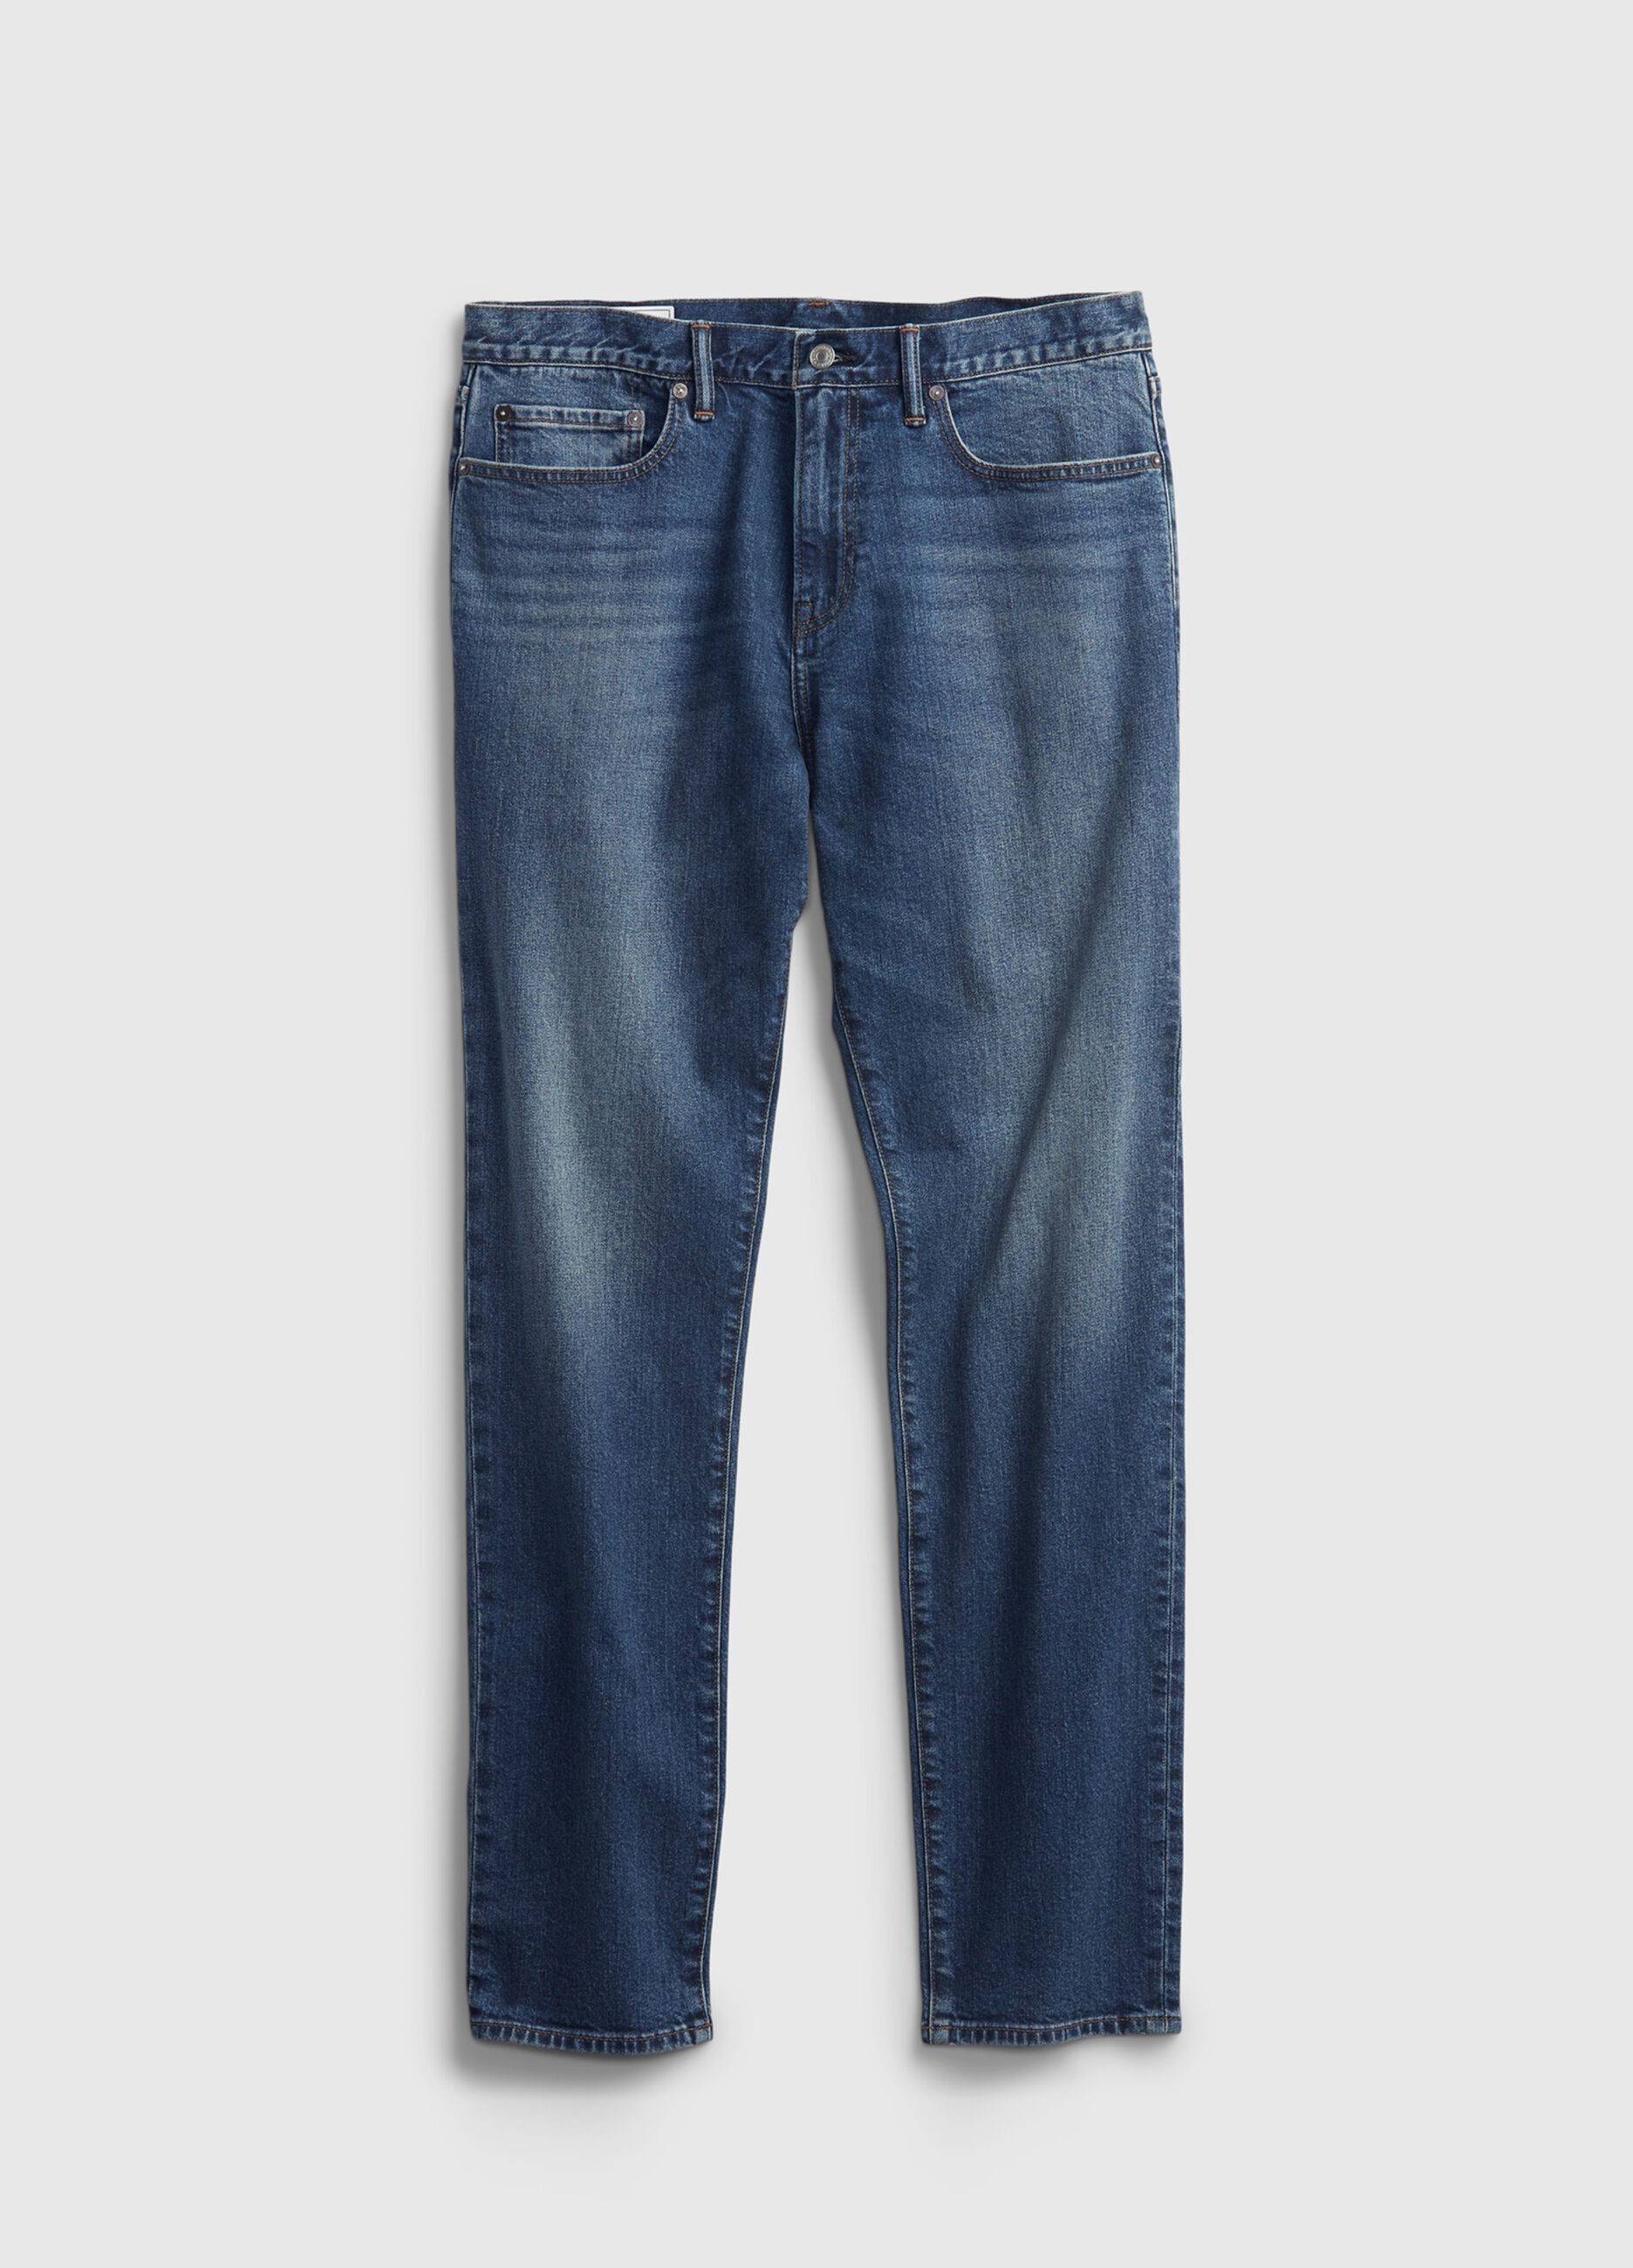 Five-pocket,straight-fit jeans